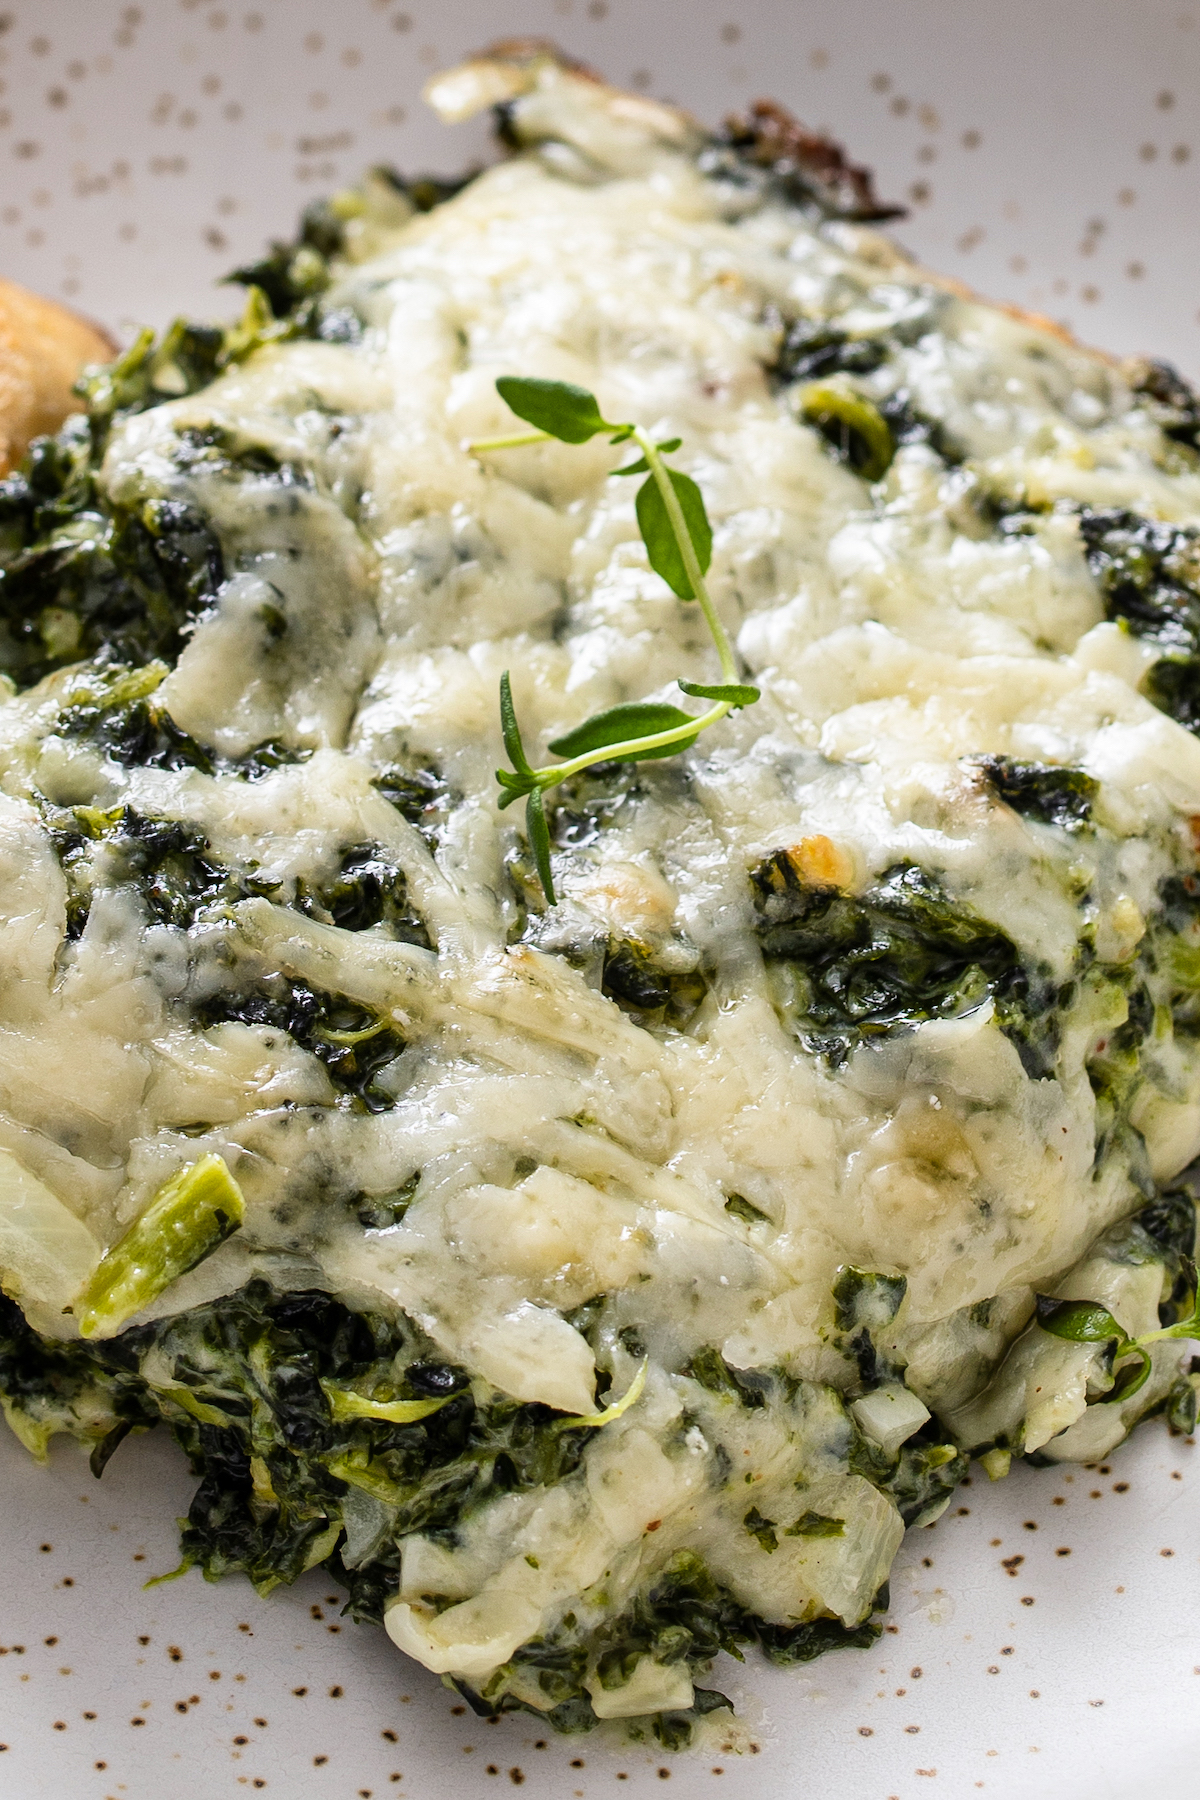 Spinach gratin with cheese and fresh herbs on top.